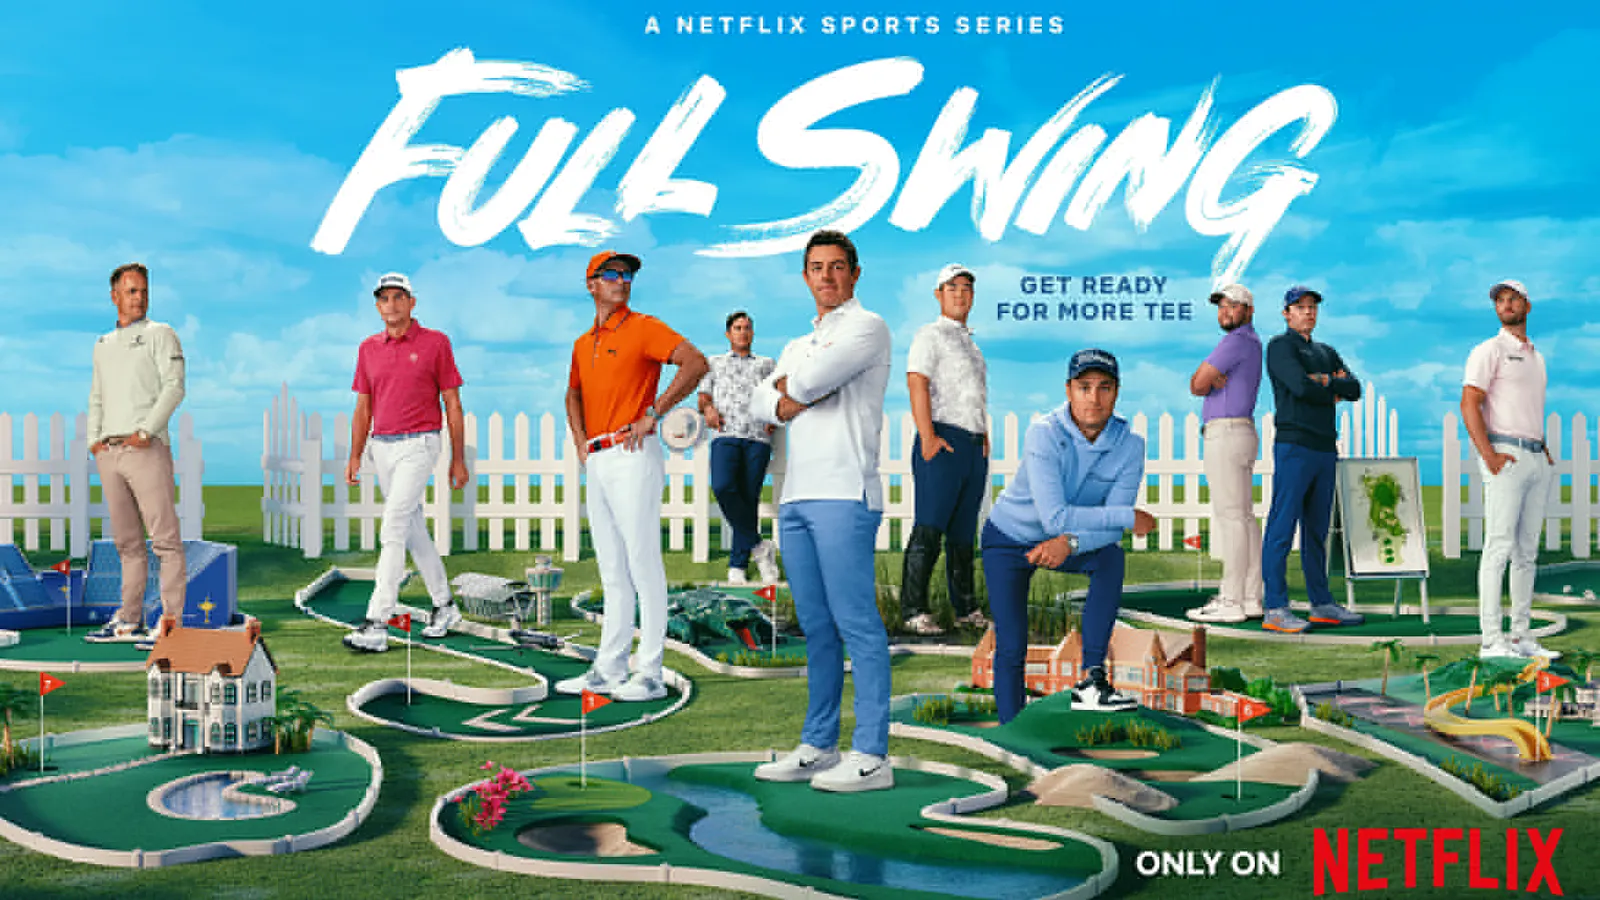 7 Highlights to watch out for in Full Swing Season 2 on Netflix